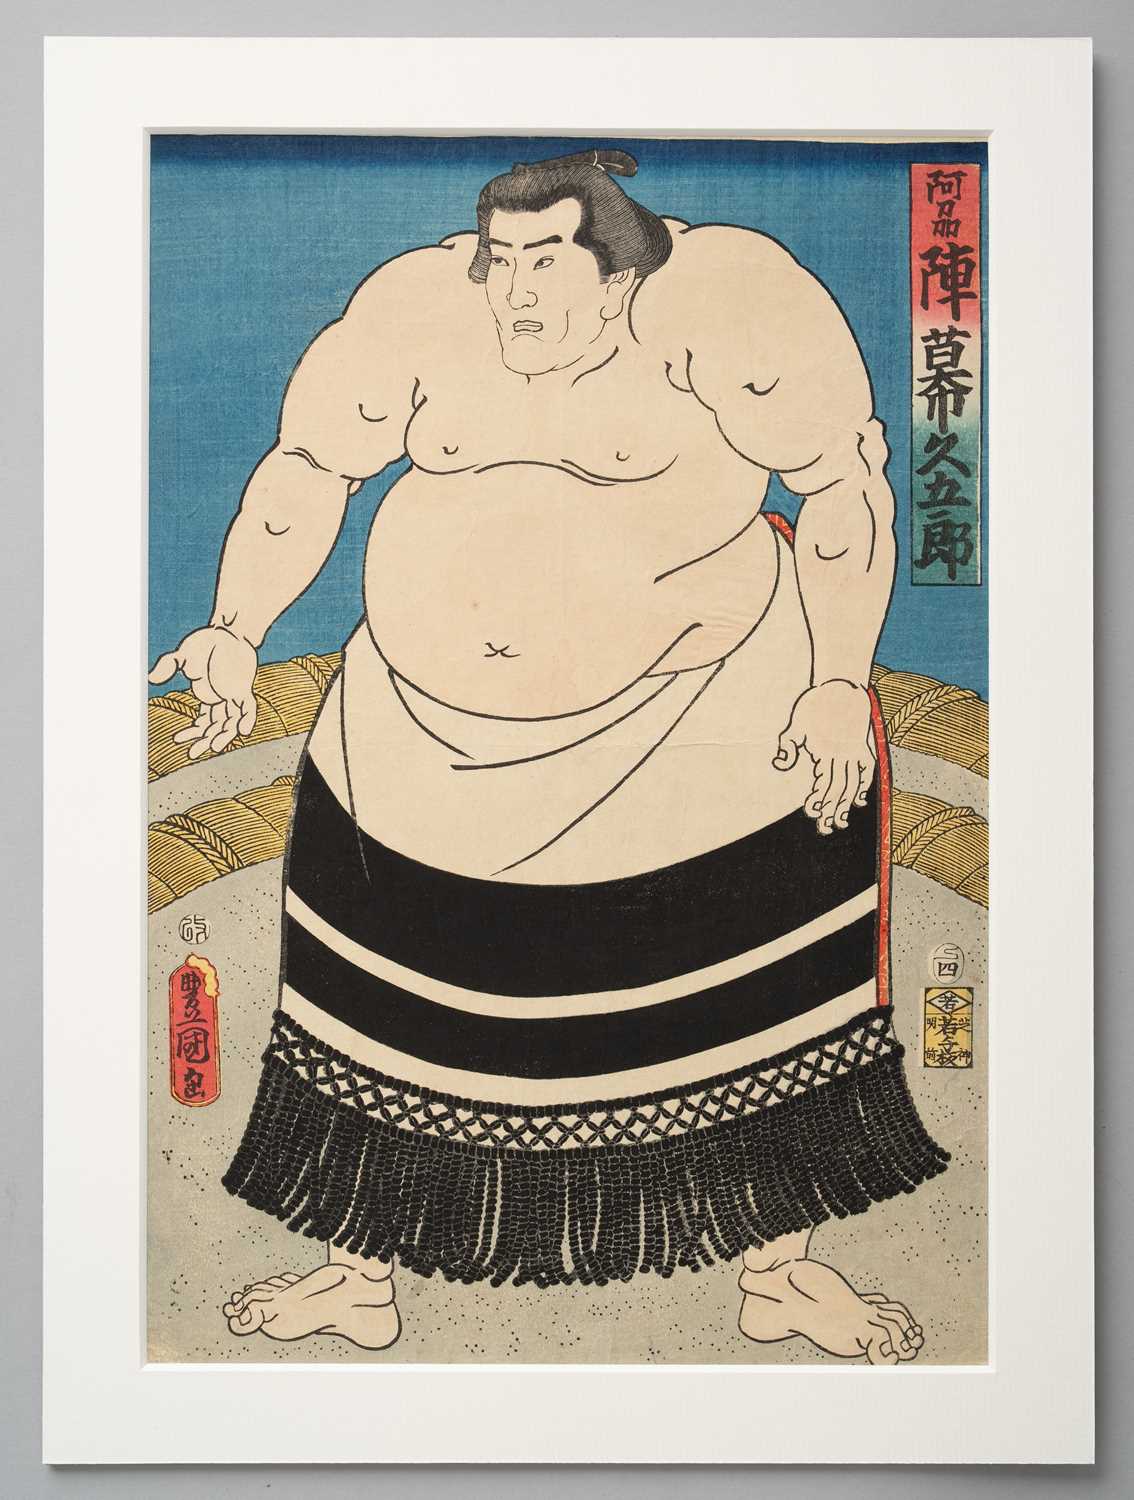 NO RESERVE UNIDENTIFIED ARTISTS SUMO-E (PORTRAITS OF SUMO WRESTLERS) EDO OR MEIJI, 19TH CENTURY A - Image 8 of 9